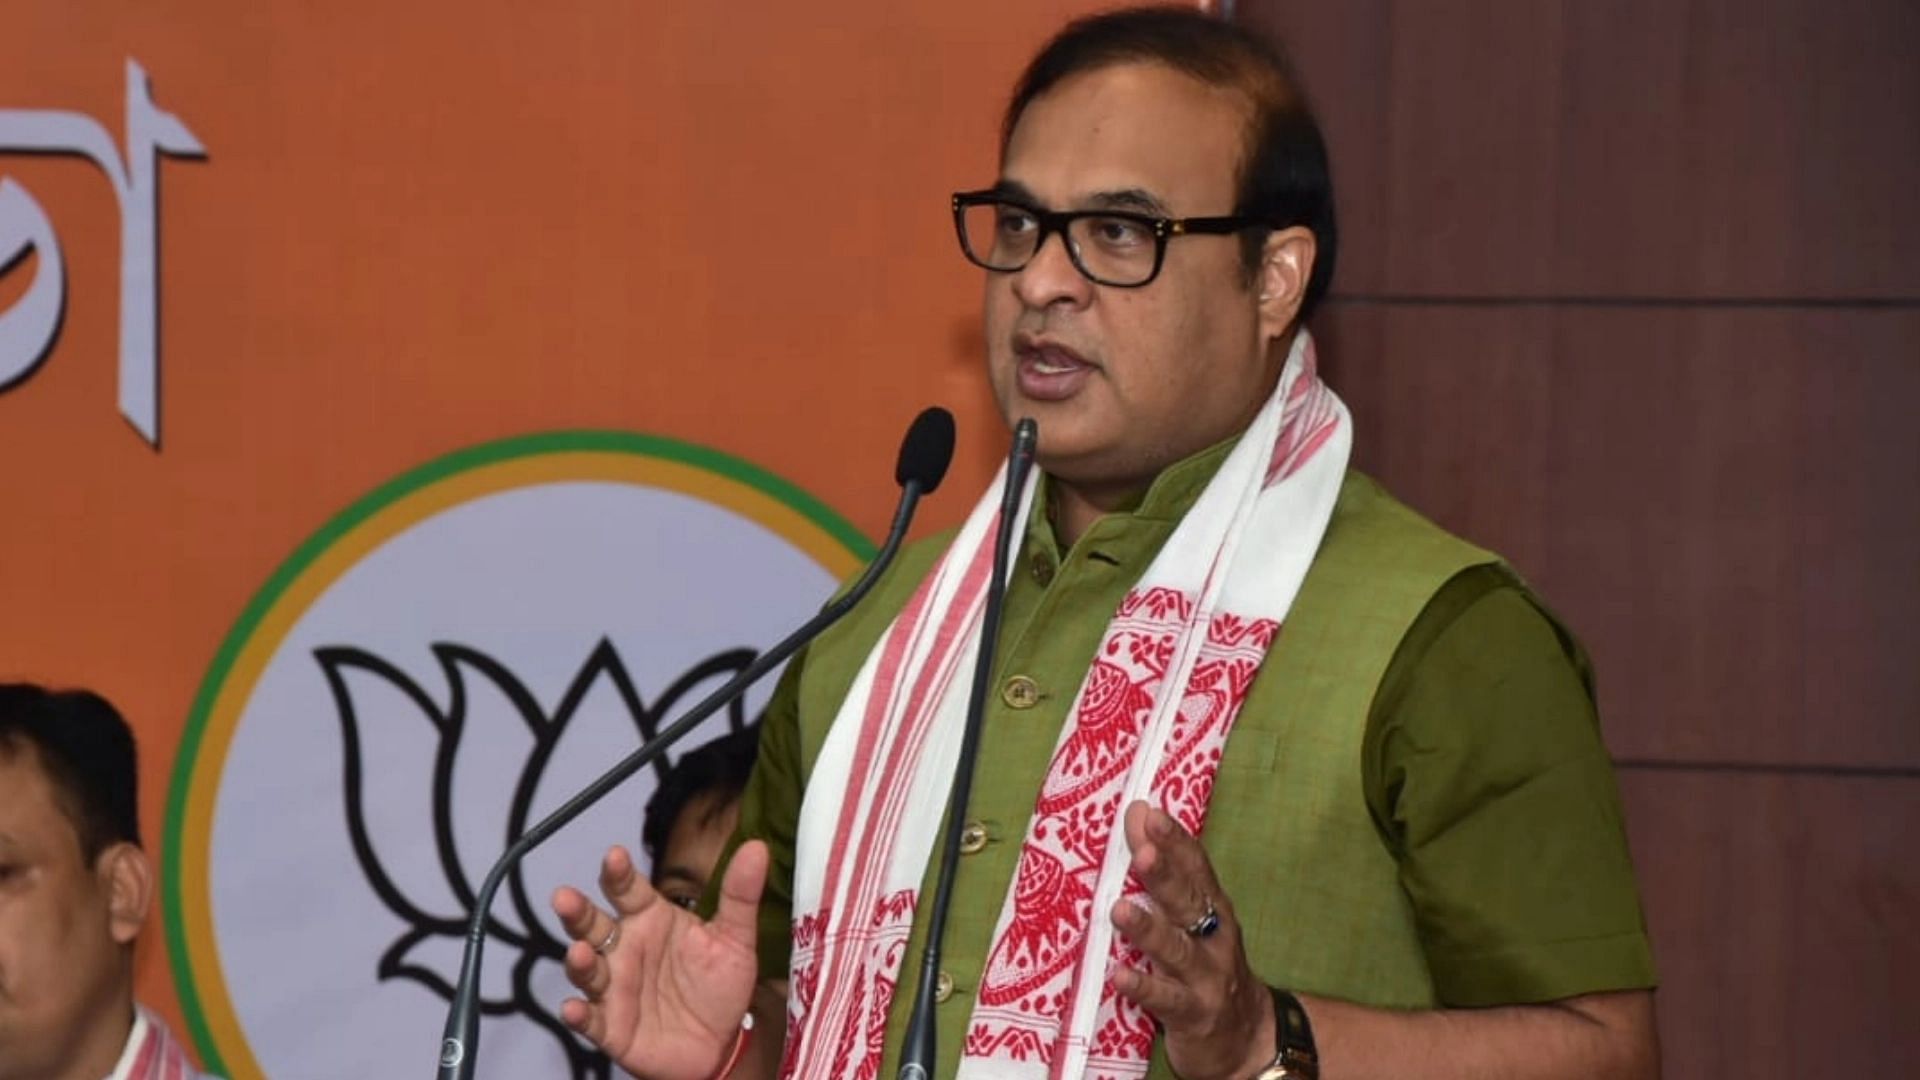 <div class="paragraphs"><p>As many as 30,000 to 40,000 houses were damaged in Assam due to the recent <a href="https://www.thequint.com/topic/assam-floods">massive floods</a>, Chief Minister Himanta Biswa Sarma said seeking an advance fund from the NDRF to help the affected people.</p></div>